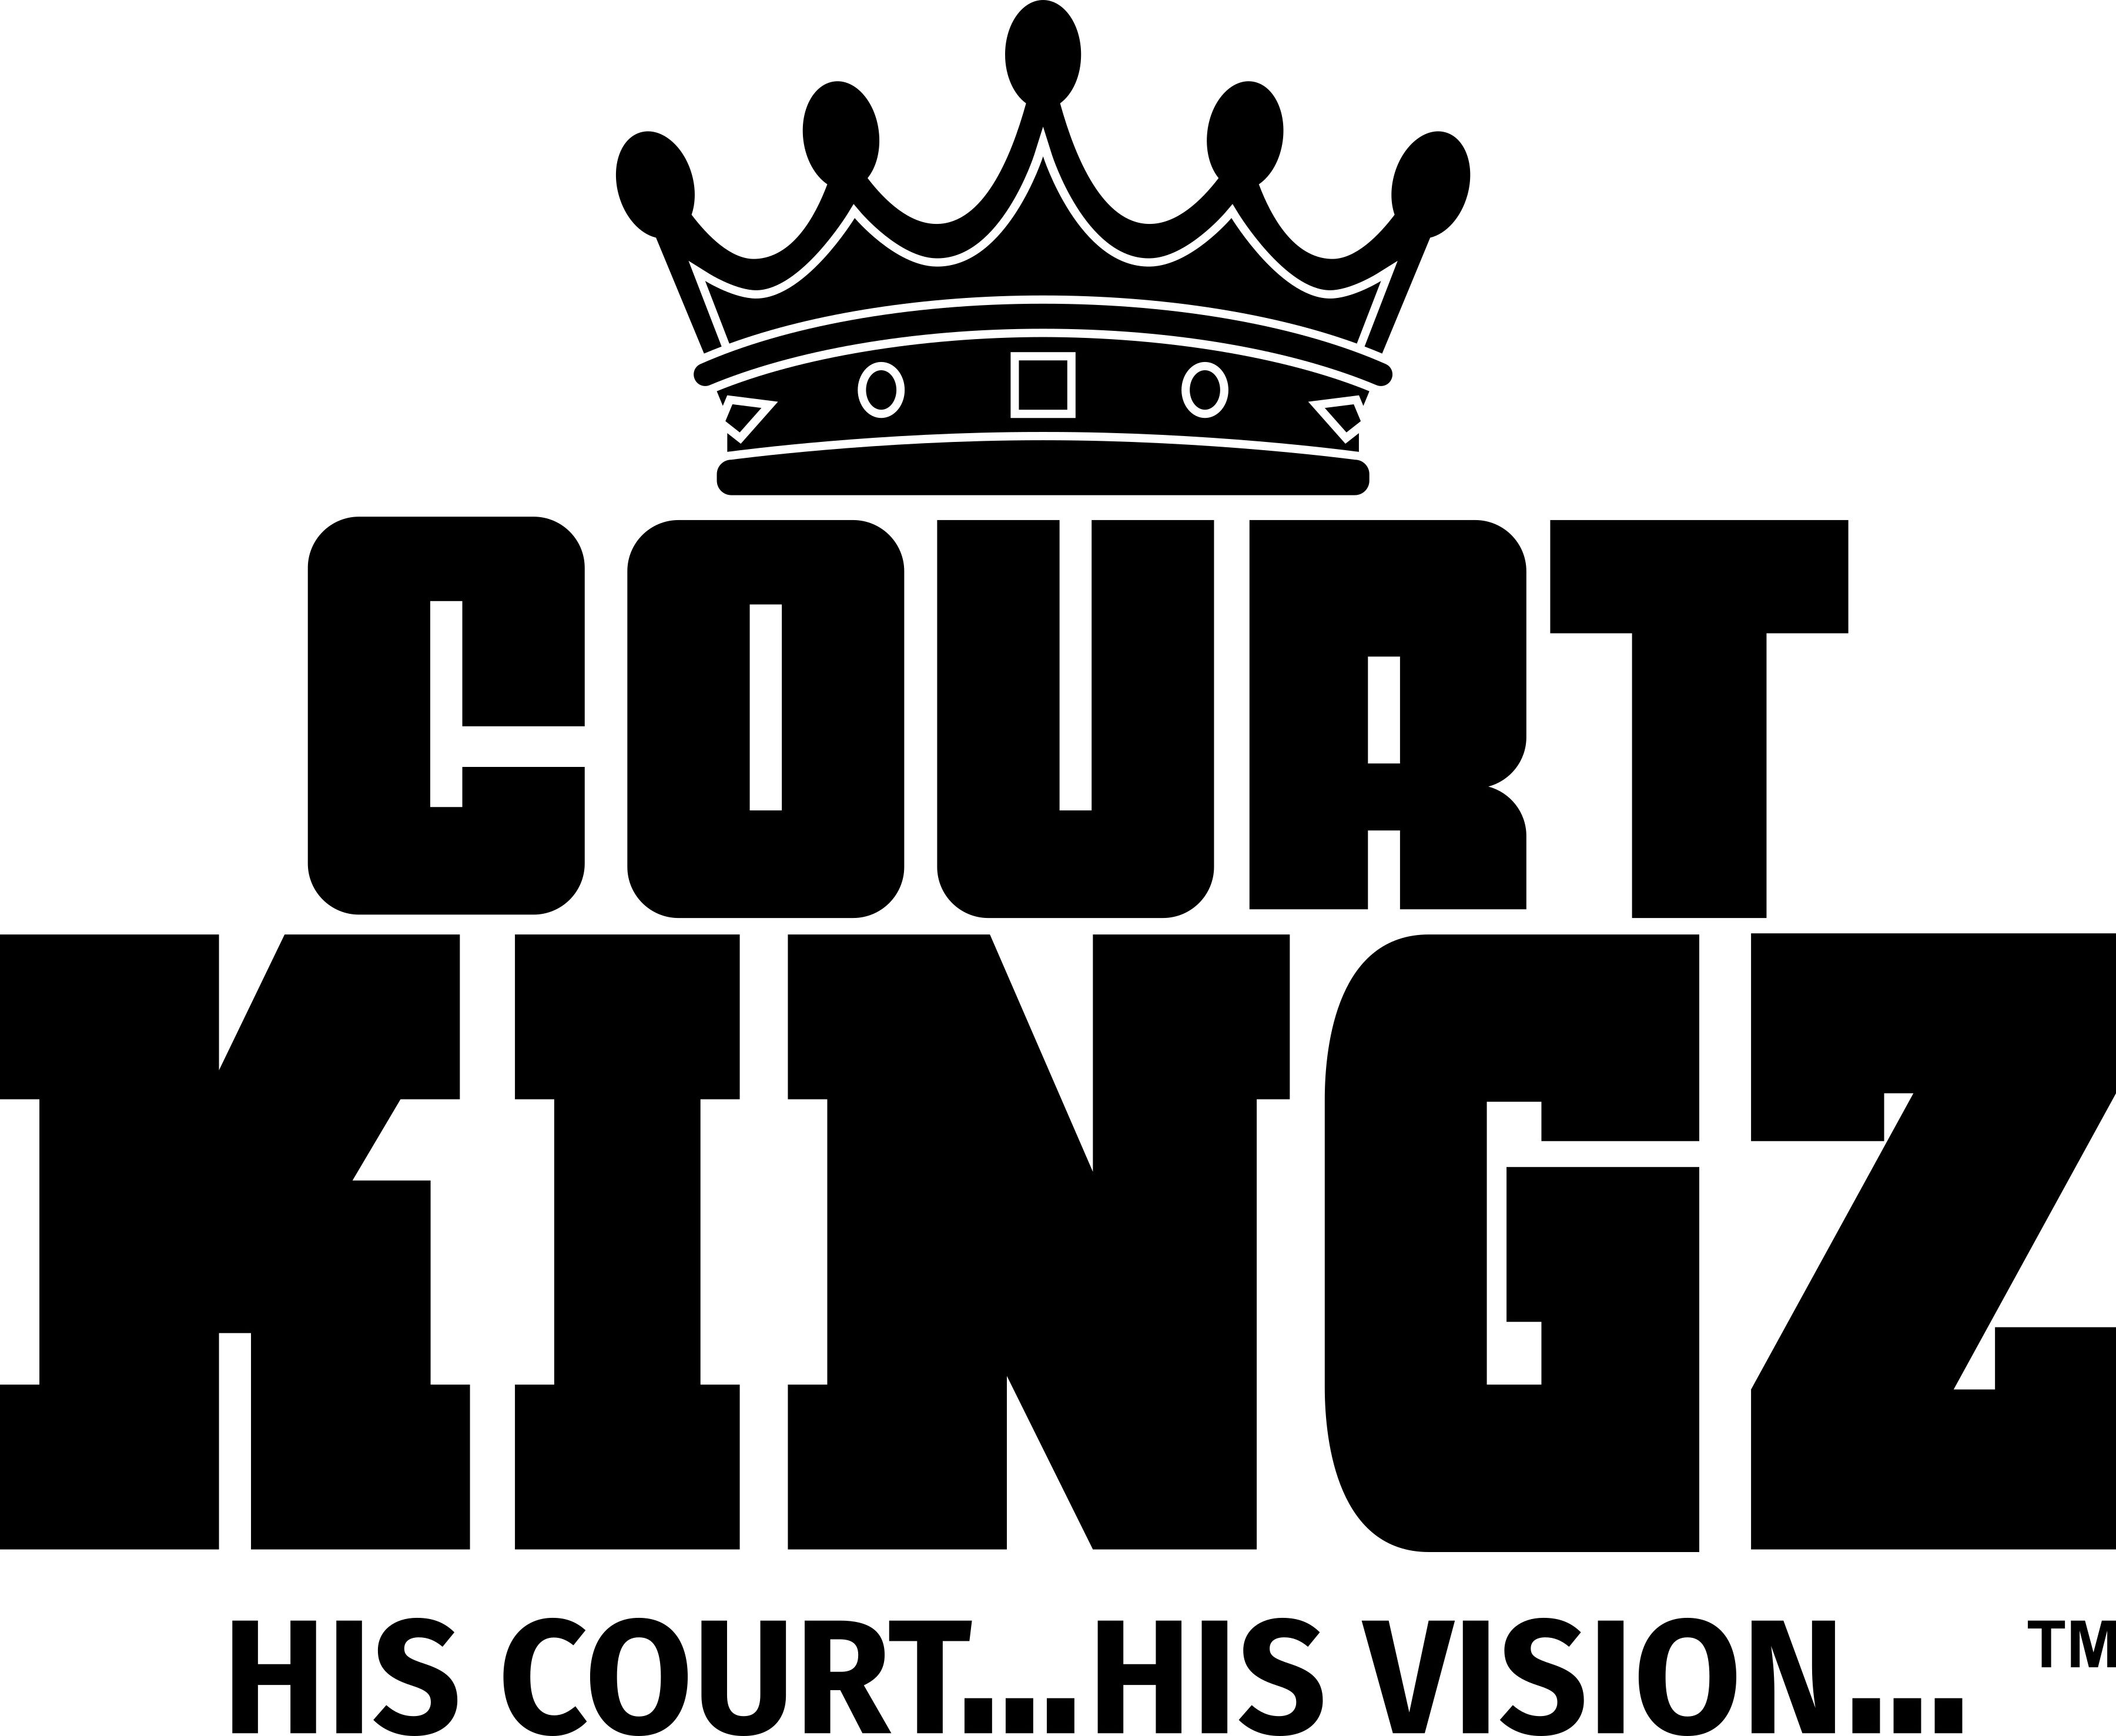  COURT KINGZ HIS COURT... HIS VISION...